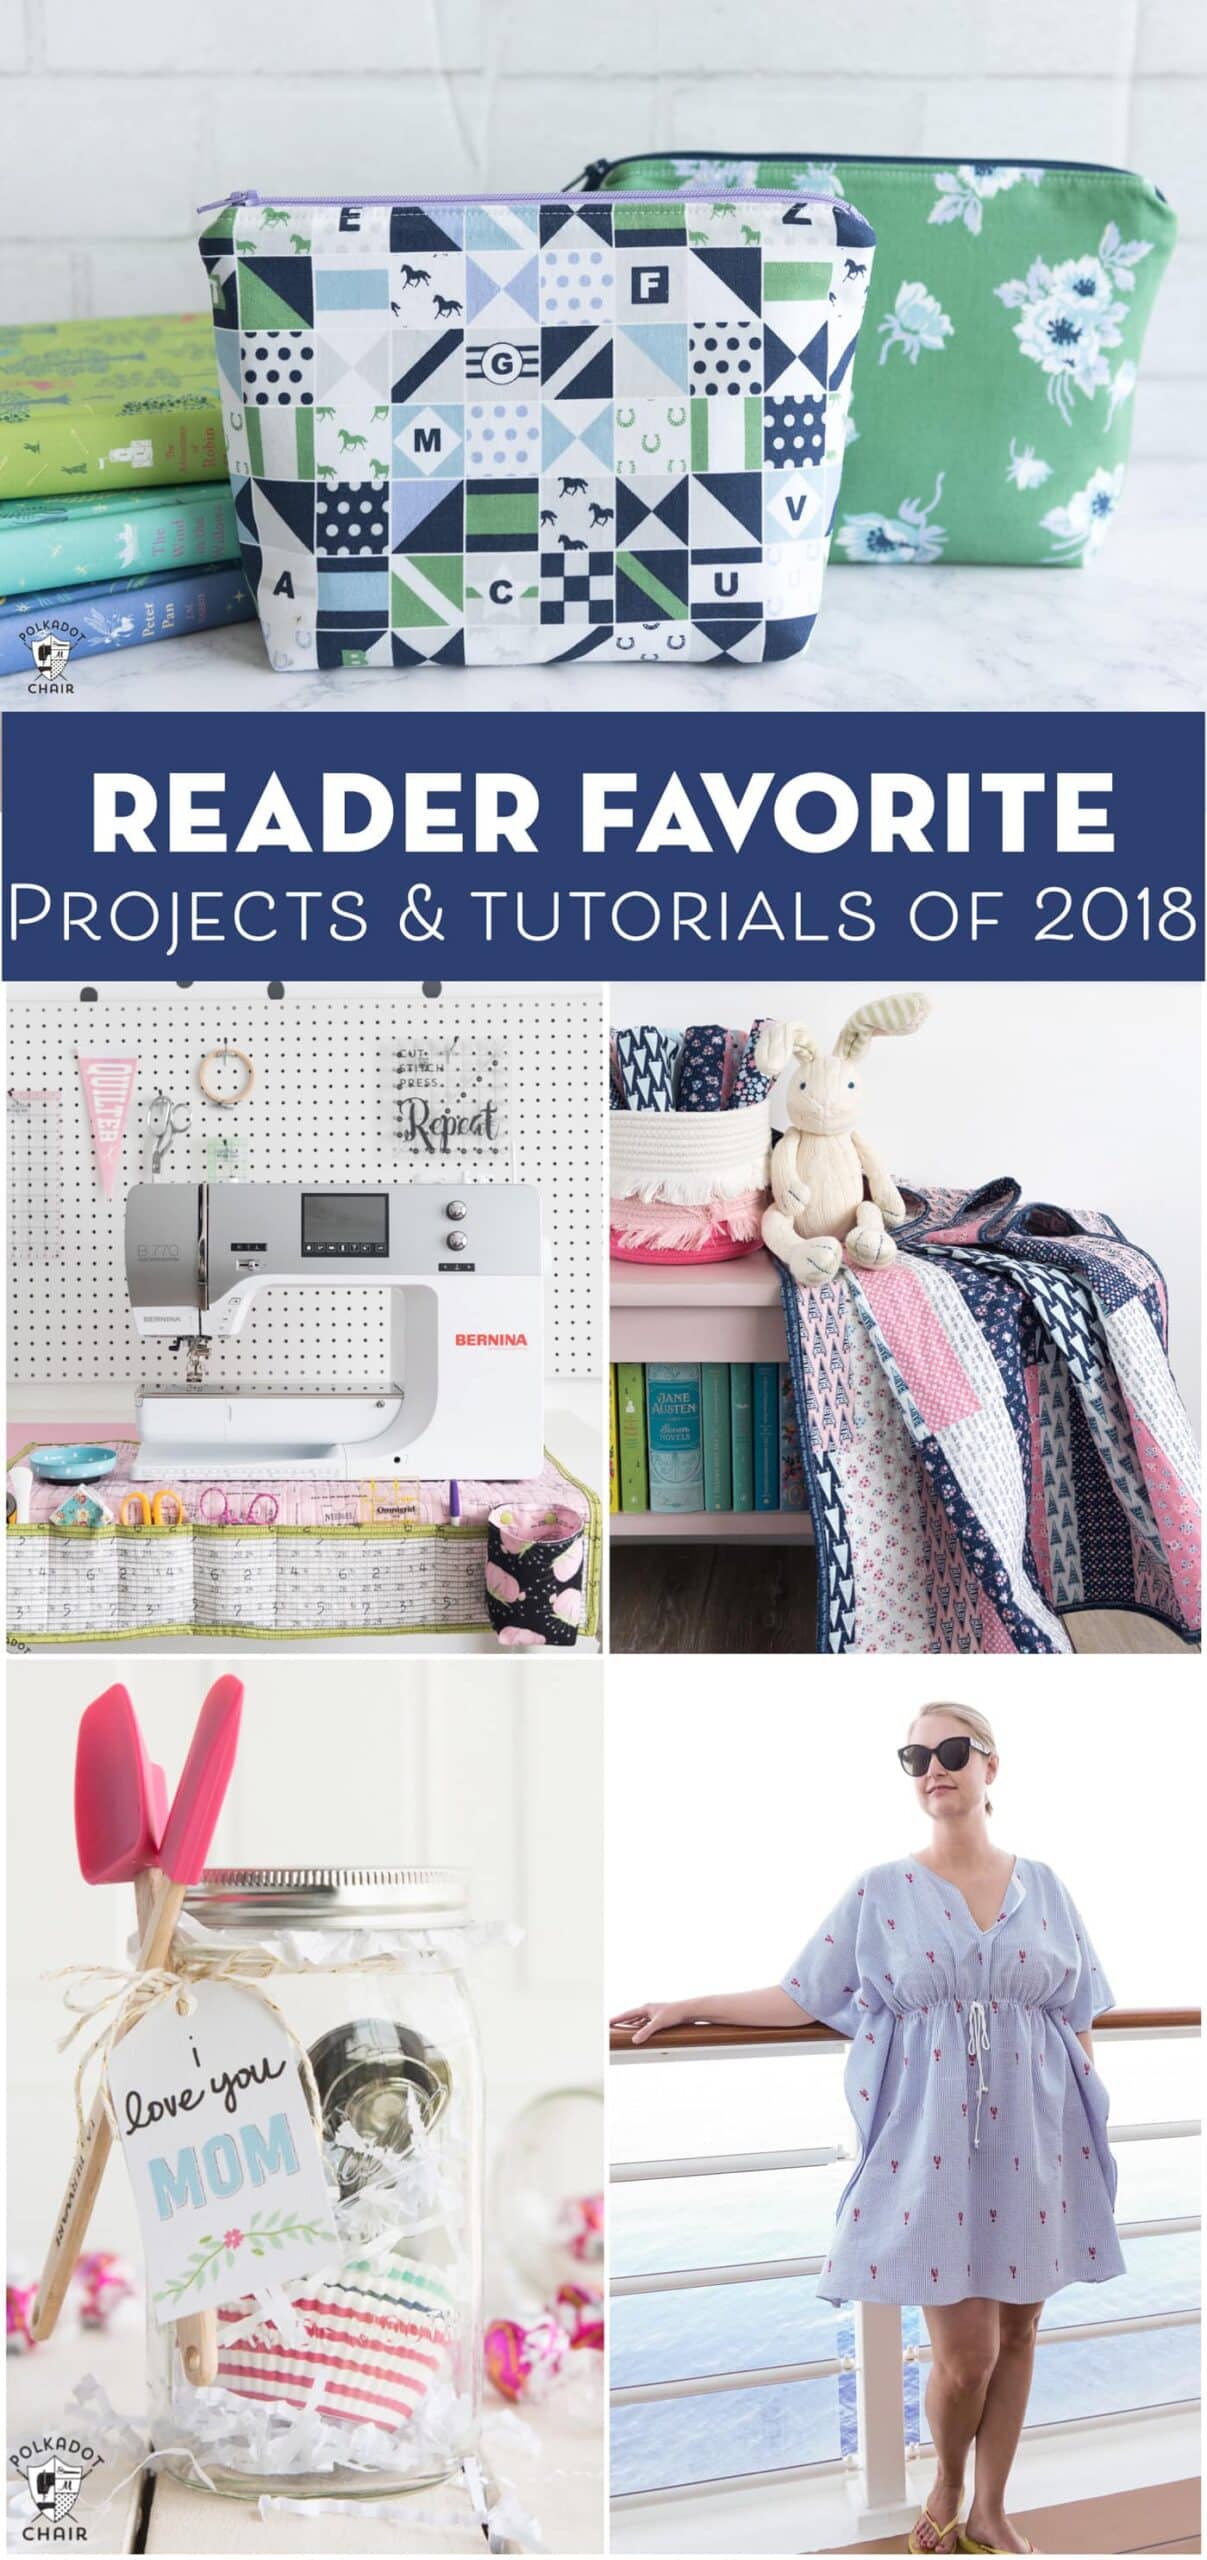 Reader Favorite Tutorials & Projects in 2018